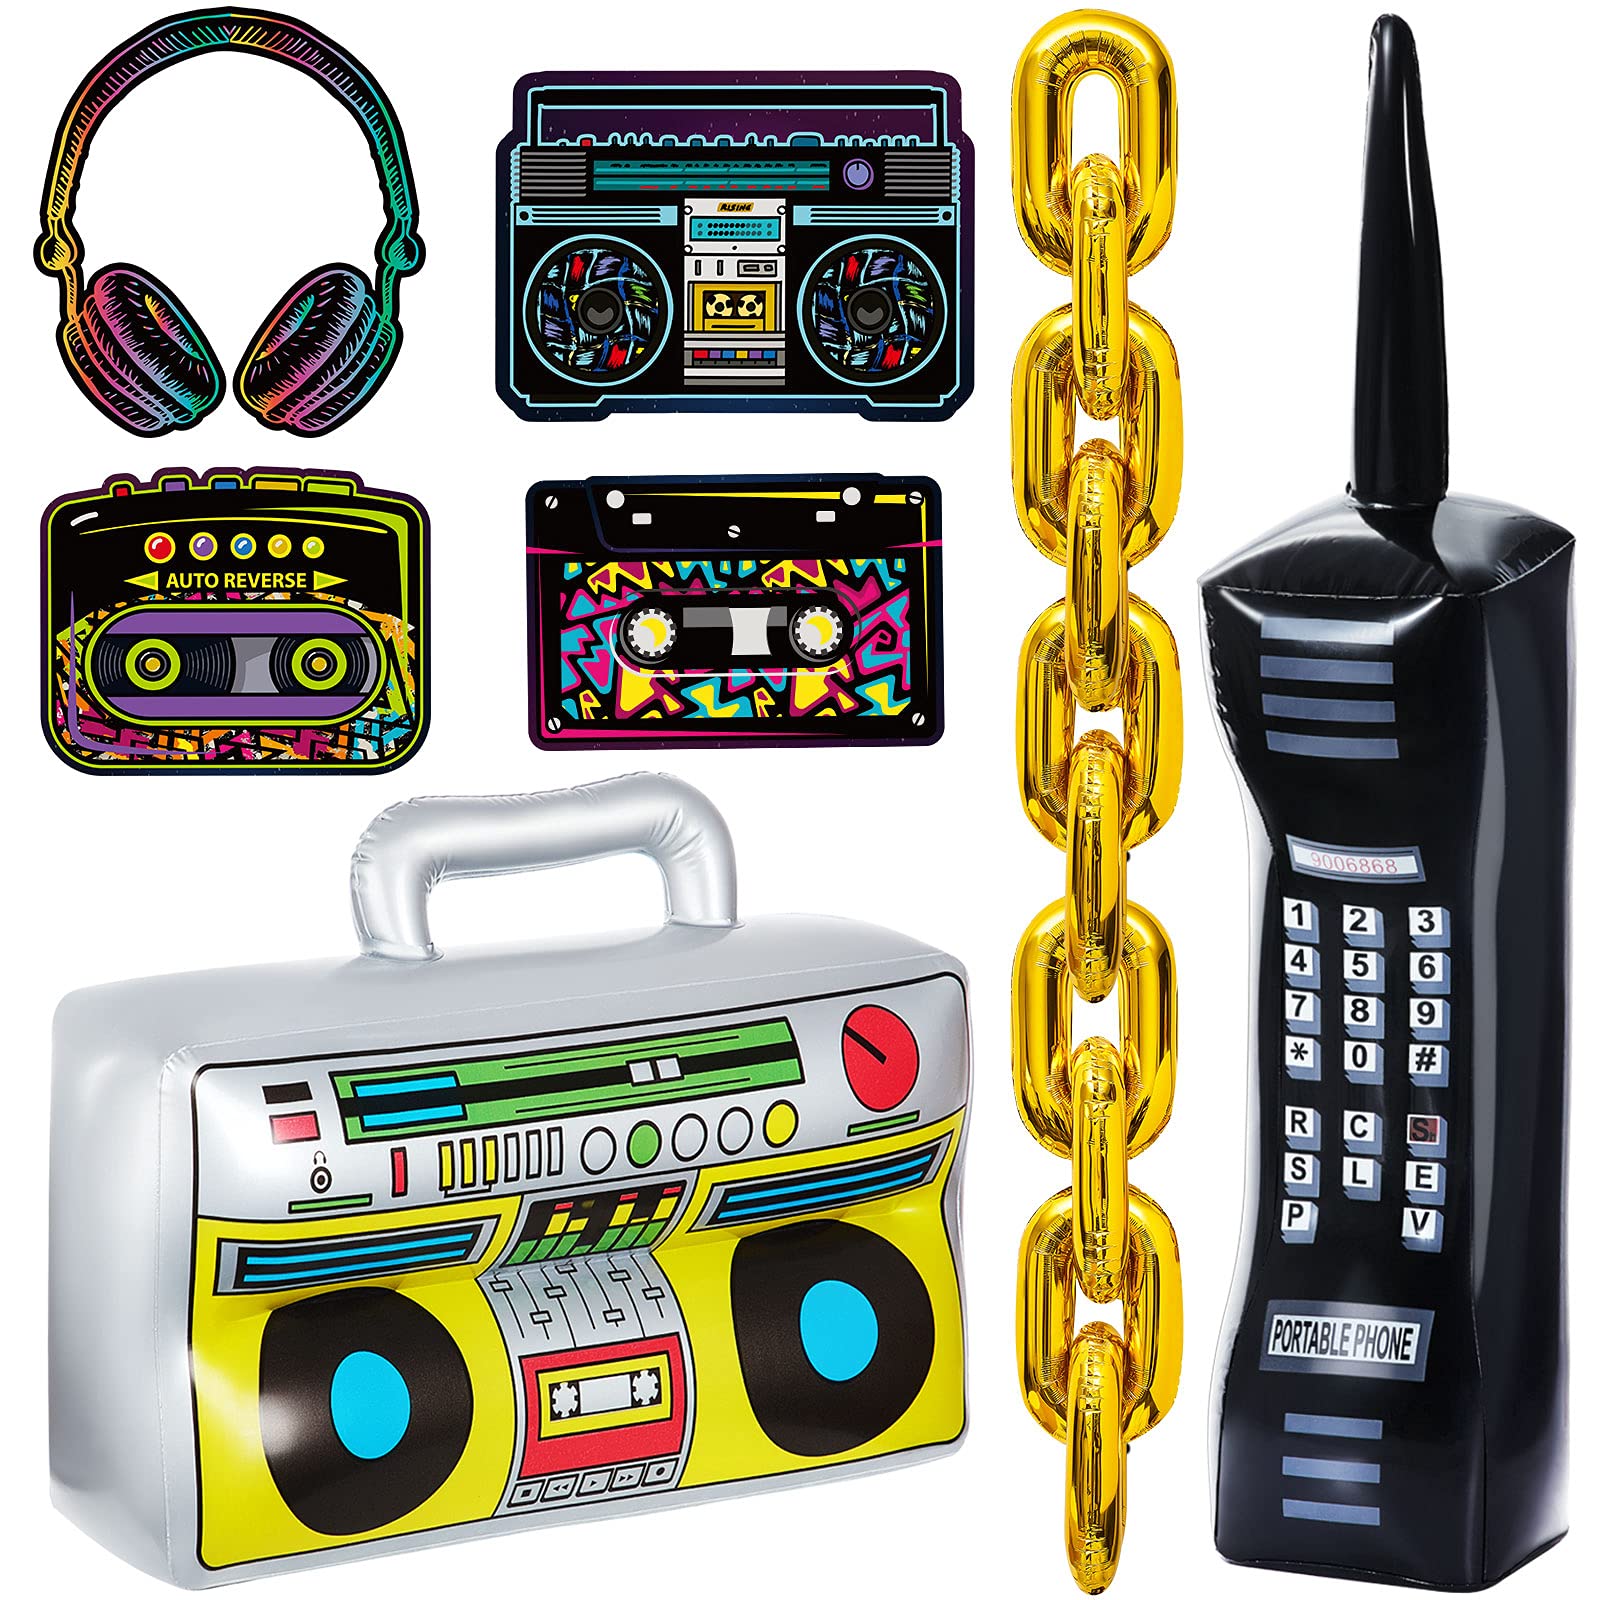 26 Pieces 80s 90s decorations Inflatable Radio Boombox Inflatable Mobile Phone Gold Inflatable Foil Chain Balloons 80s 90s Props Retro Cassette Headphones Player Cutouts for Hip Hop Party Decoration